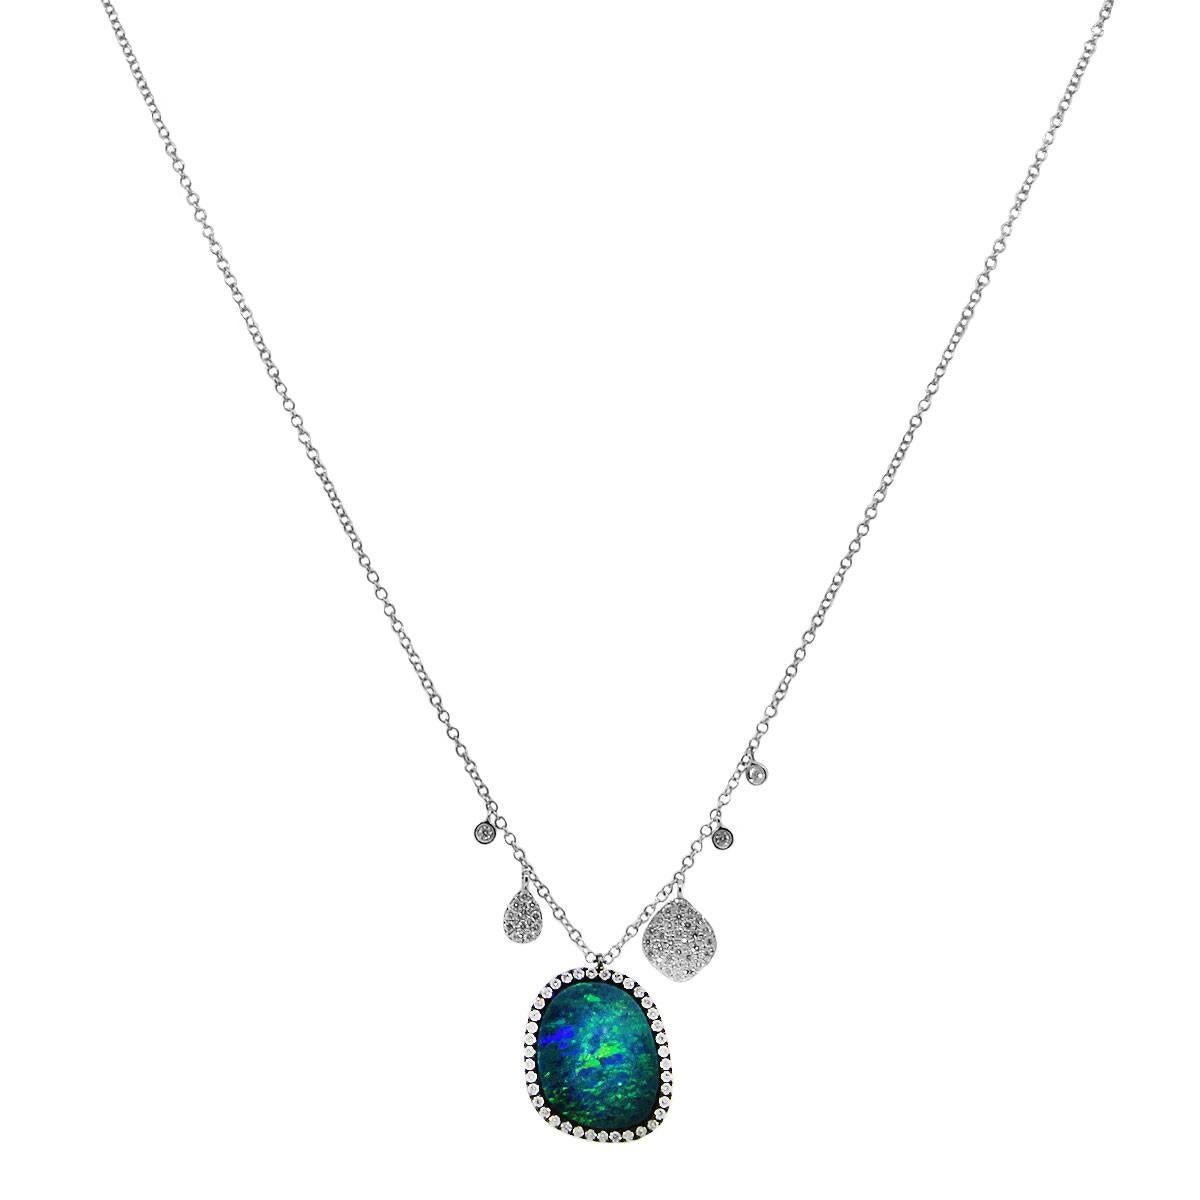 Brand: Meira T
Material: 14k white gold
Diamond Details: 0.61ctw of round brilliant diamonds. Diamonds are G/H in color and VS in clarity.
Gemstone Details: 3.55ct opal gemstone (triplet)
Necklace Measurements: 16″
Clasp: Lobster clasp
Total Weight: